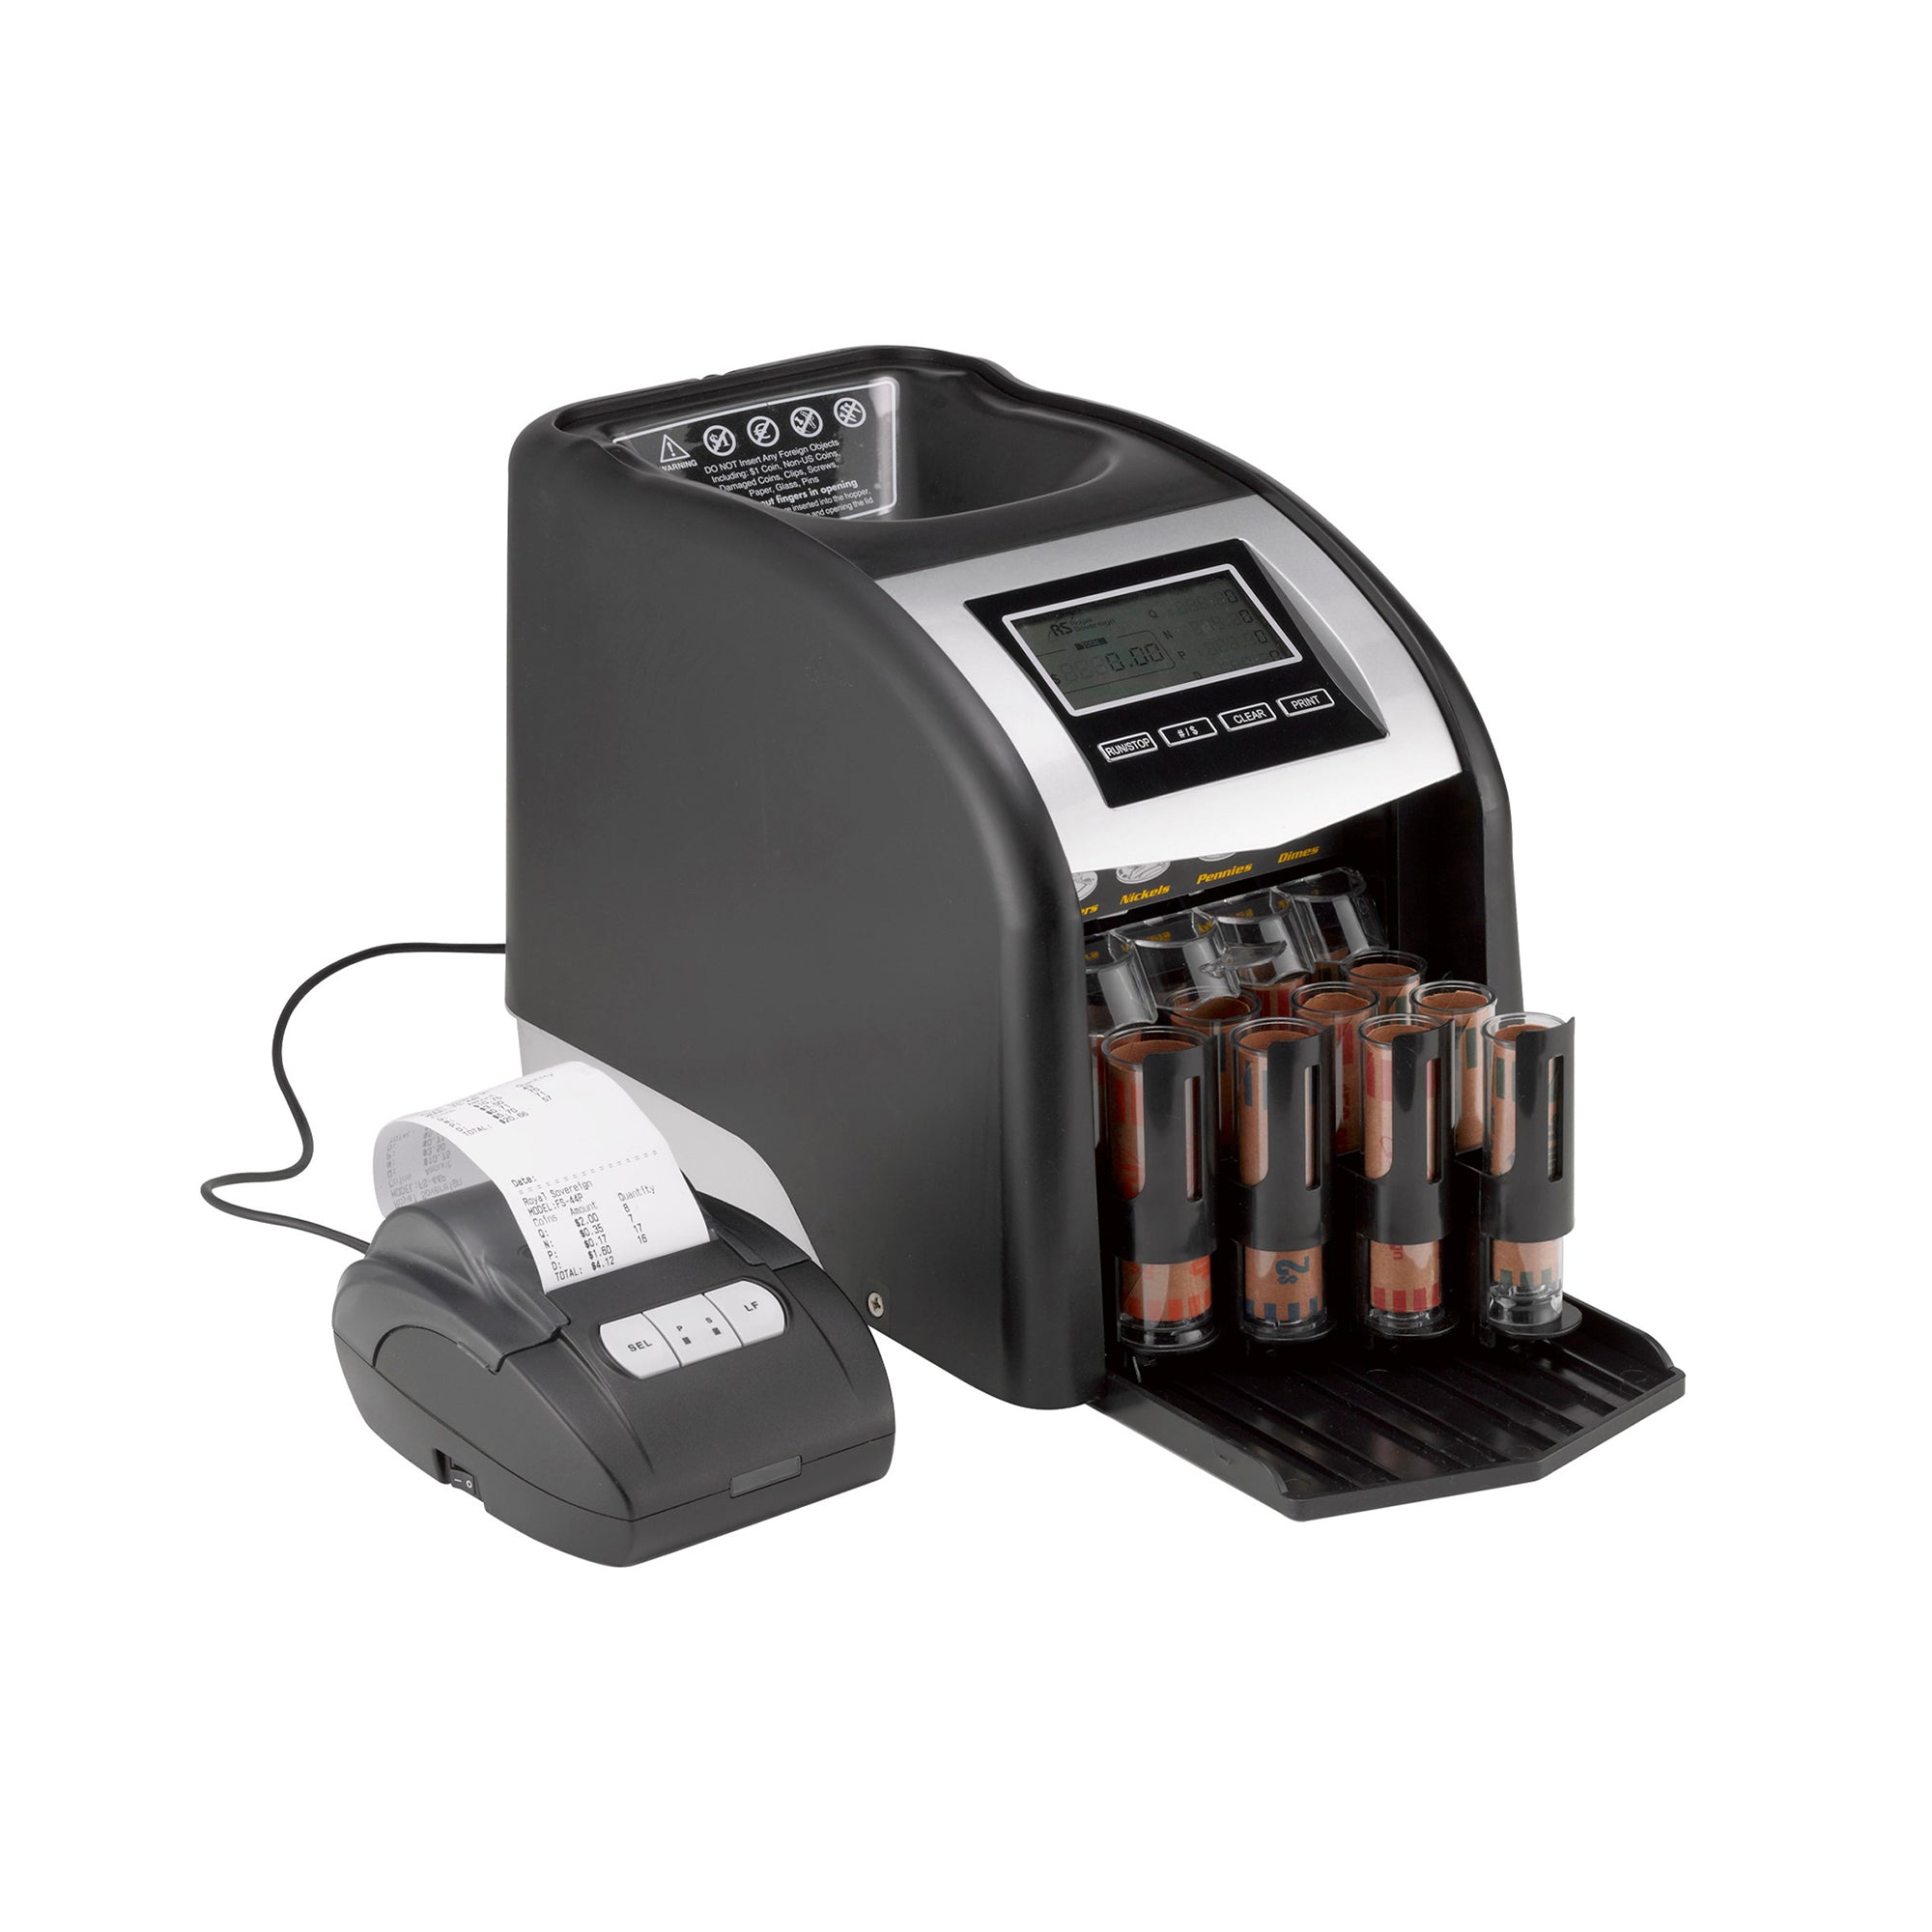 FS-44N, Coin Counter with Value Display, Four Row